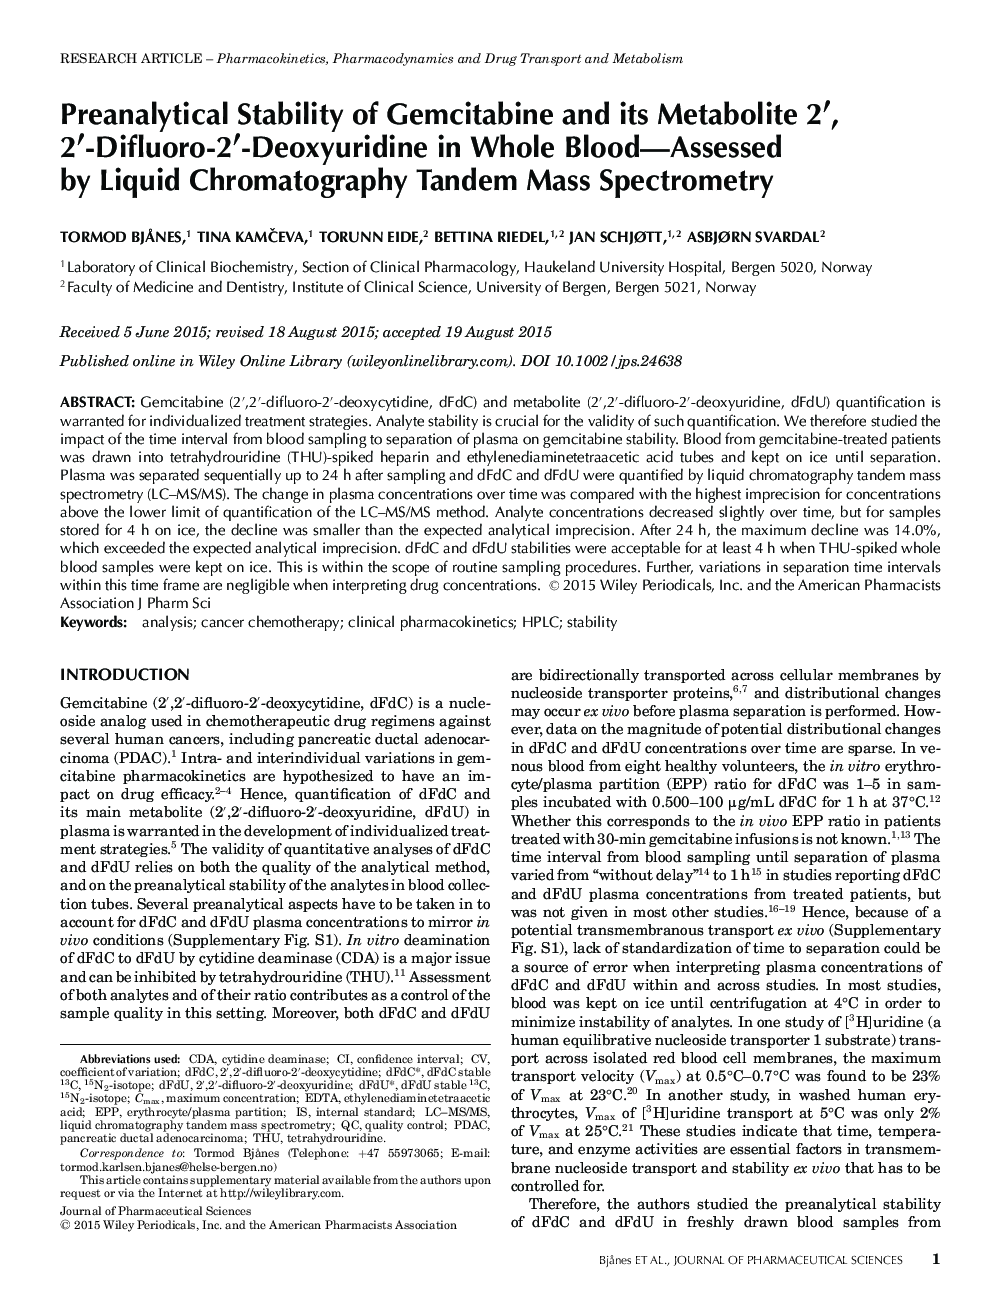 Preanalytical Stability of Gemcitabine and its Metabolite 2â², 2â²-Difluoro-2â²-Deoxyuridine in Whole Blood-Assessed by Liquid Chromatography Tandem Mass Spectrometry